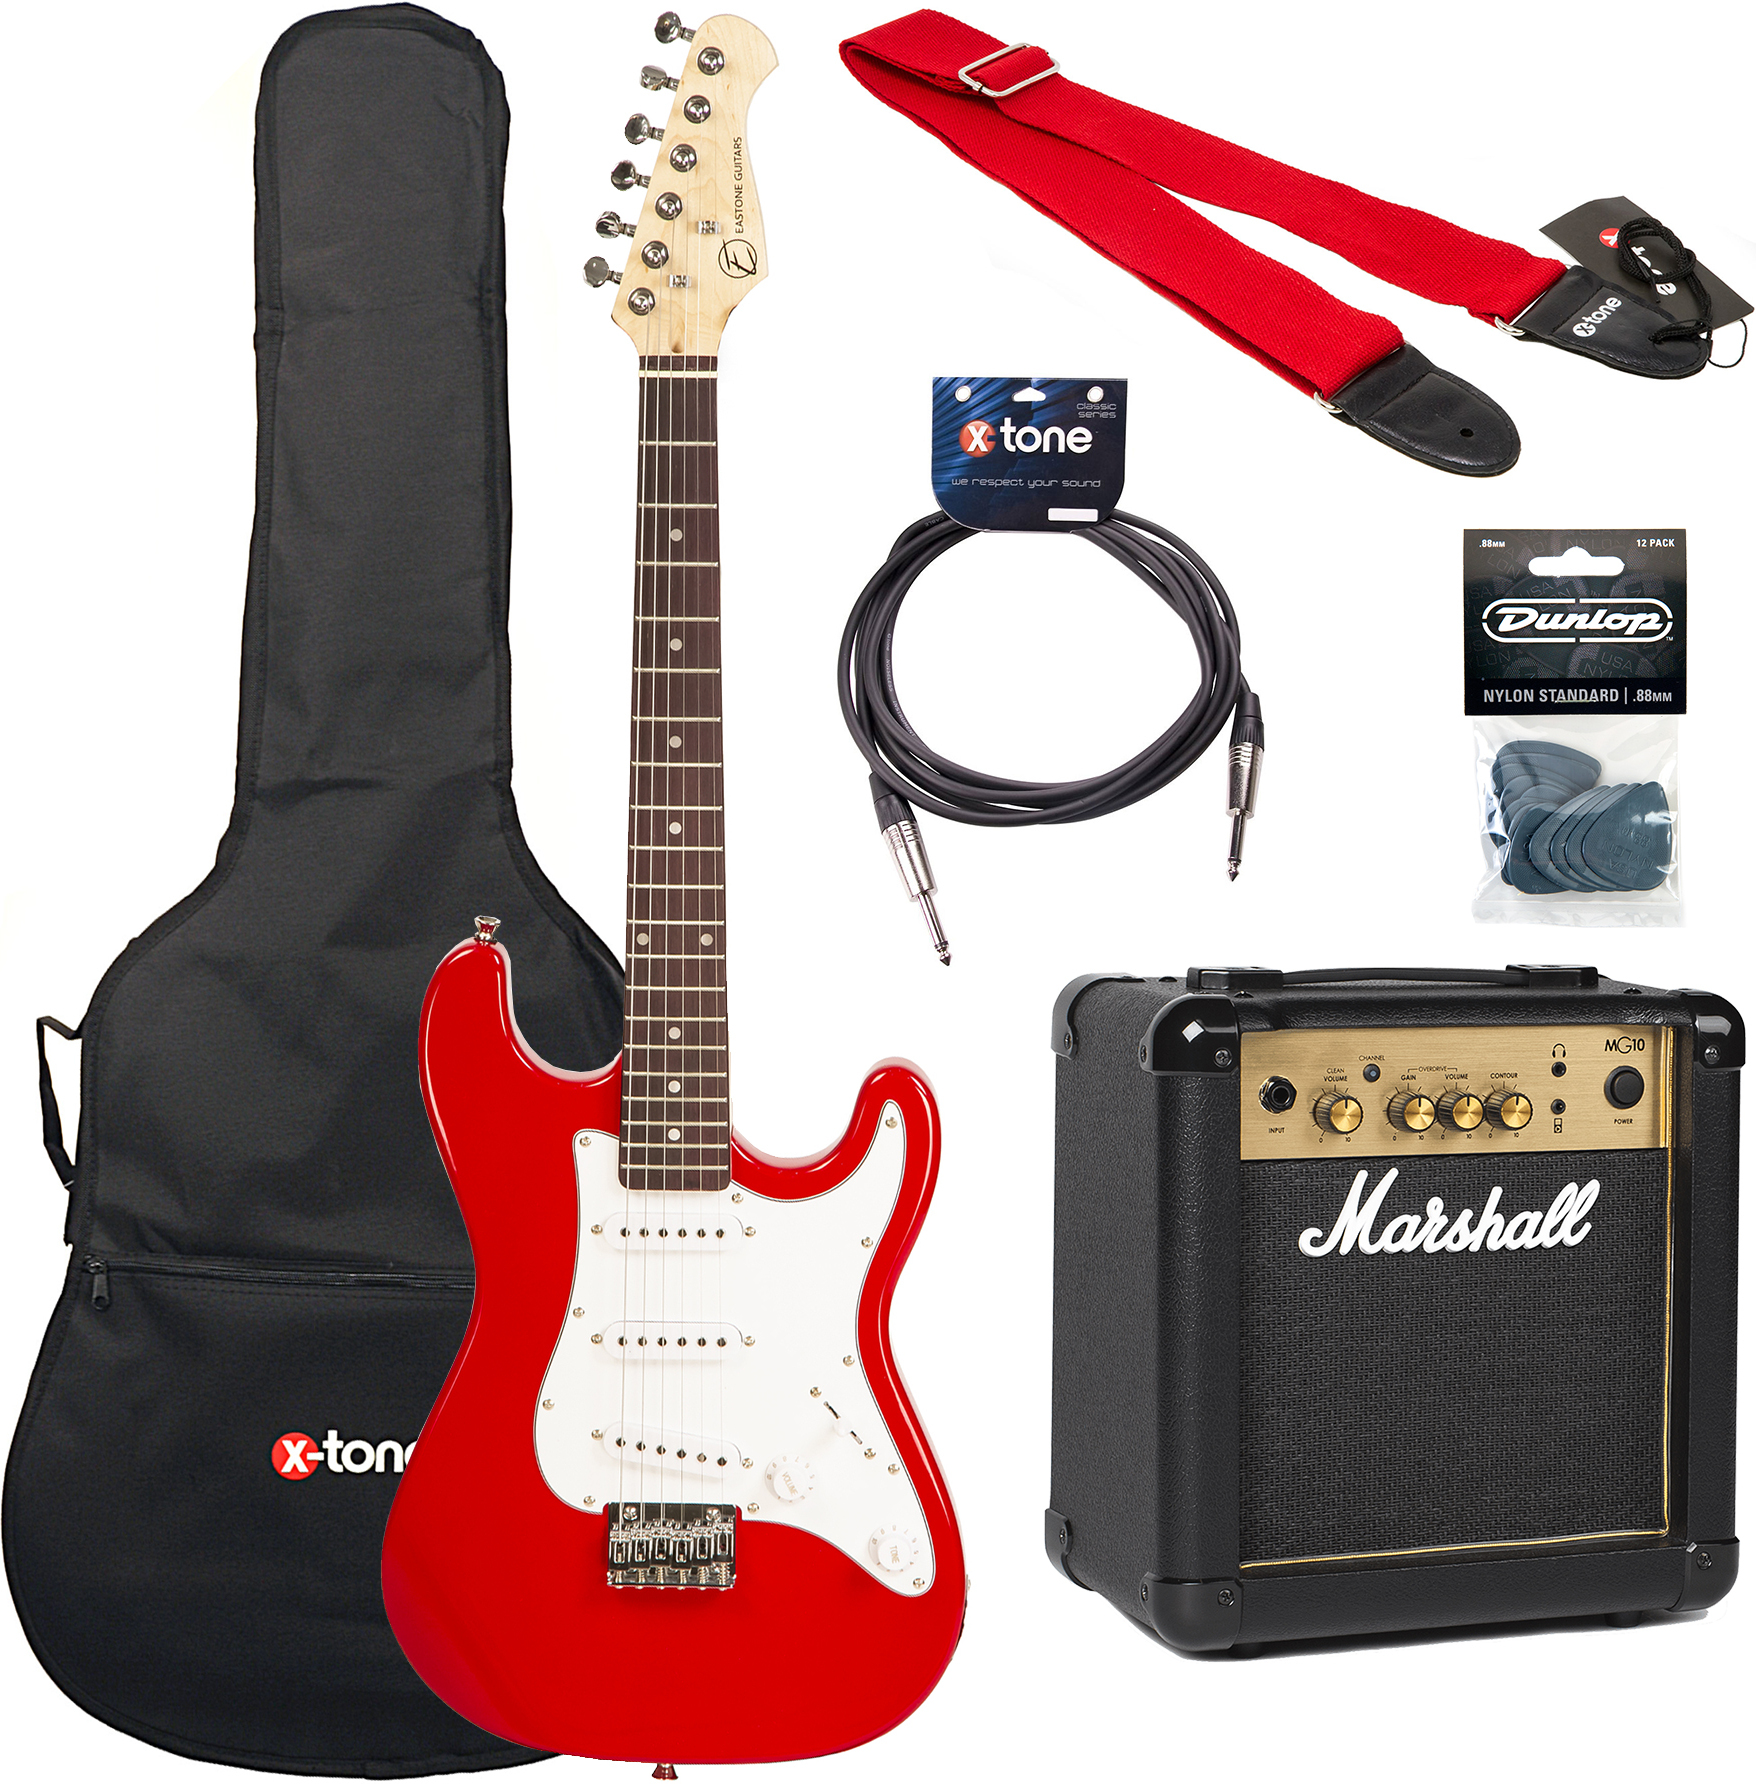 Eastone Str Mini +marshall Mg10g +cable +housse+ Courroie+ Mediators + Mg10g Gold Combo 10 W - Red - Pack Guitare Électrique - Main picture